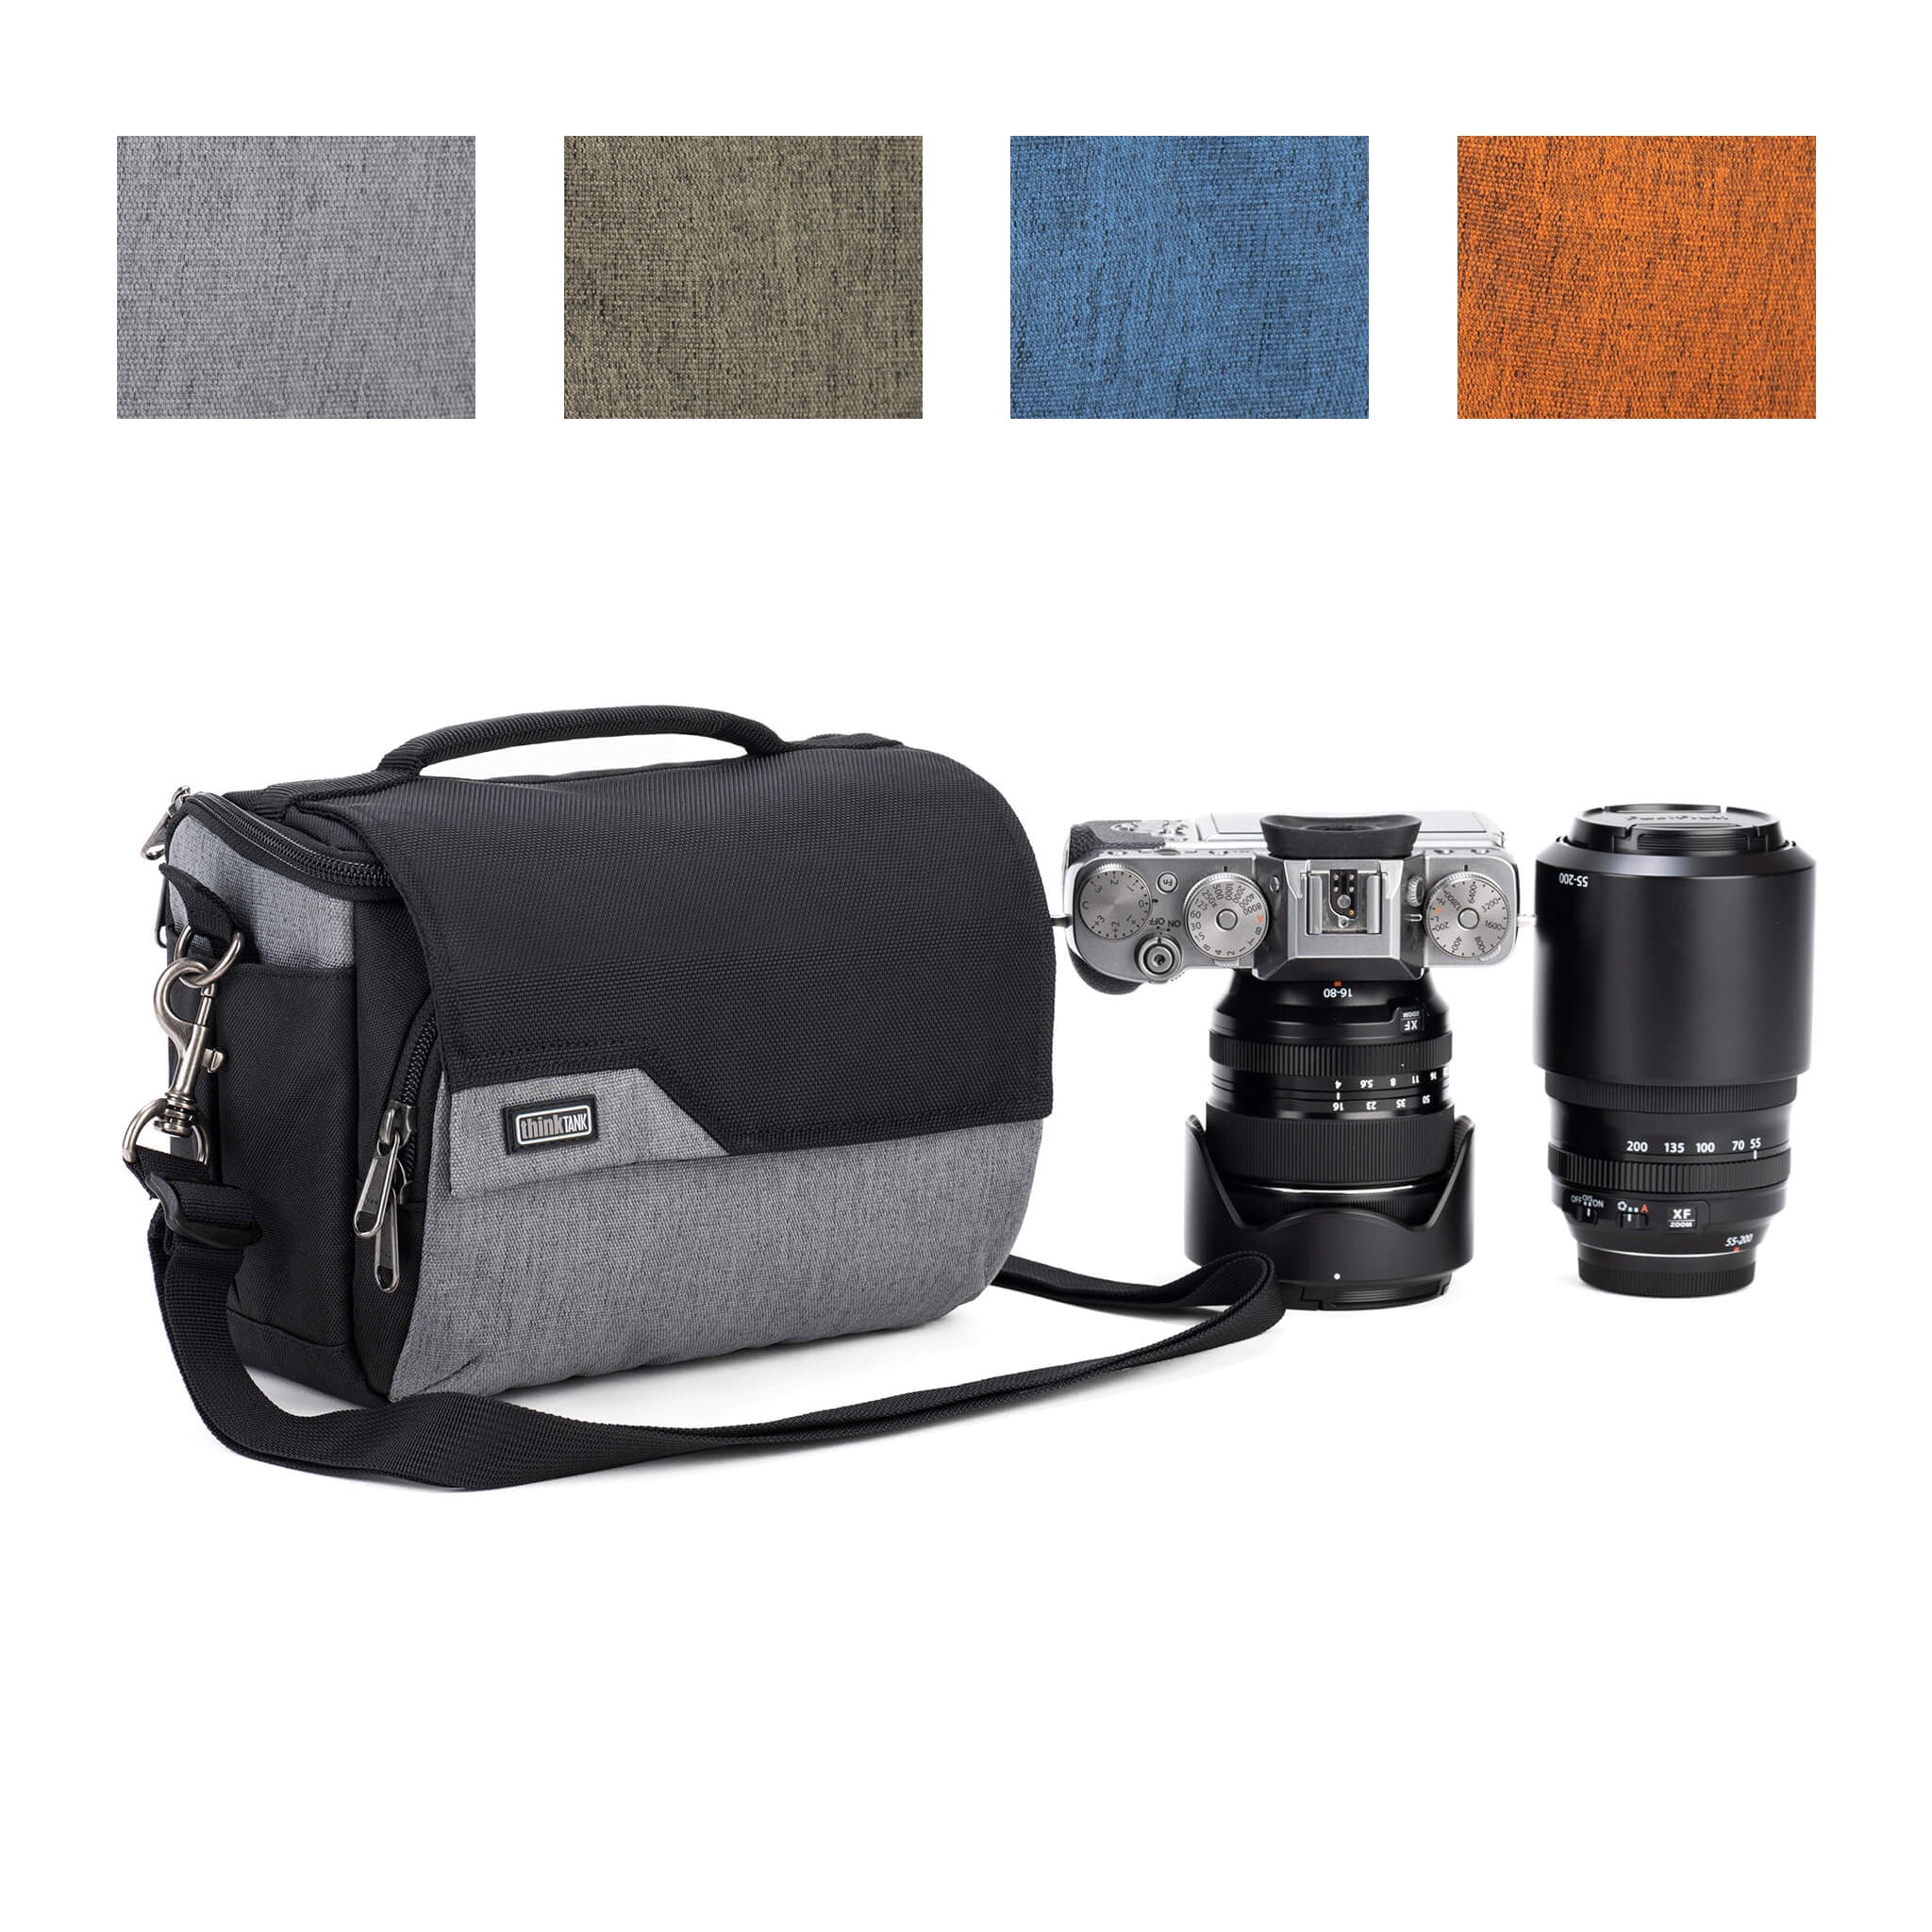 Buy Think Tank Airport Advantage Roller Bag online from Sharp Imaging